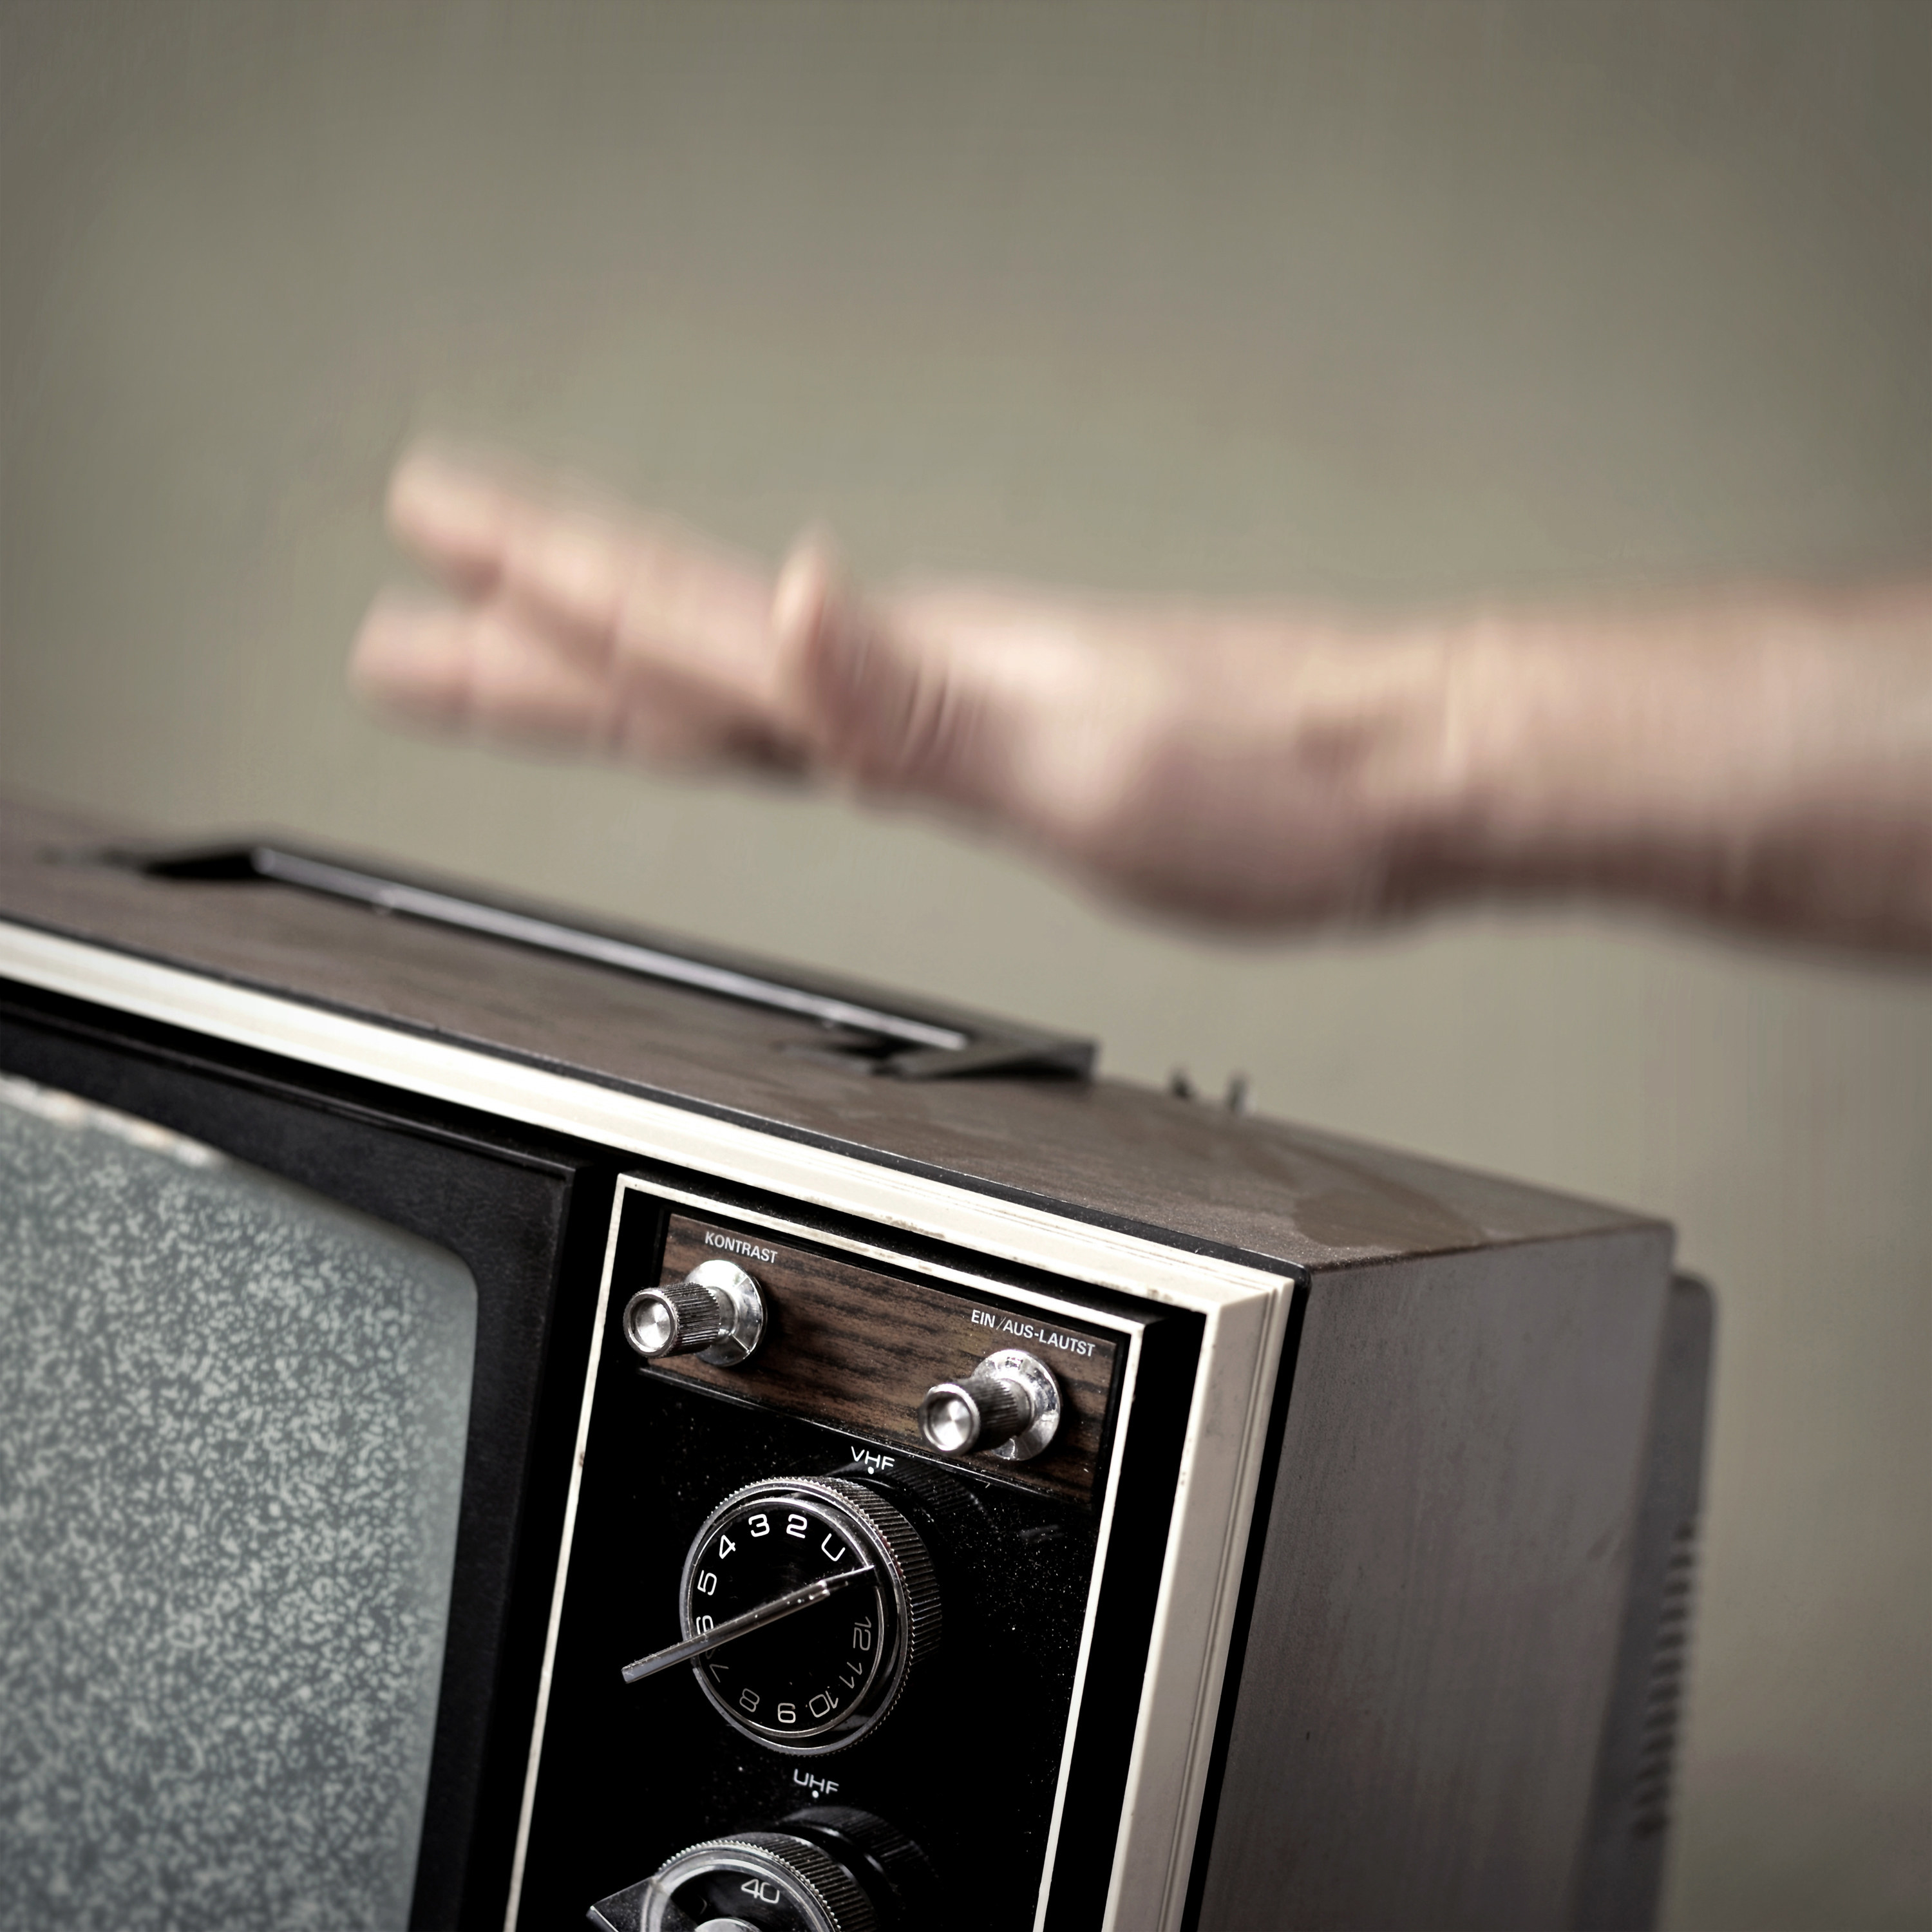 a person hitting a tv